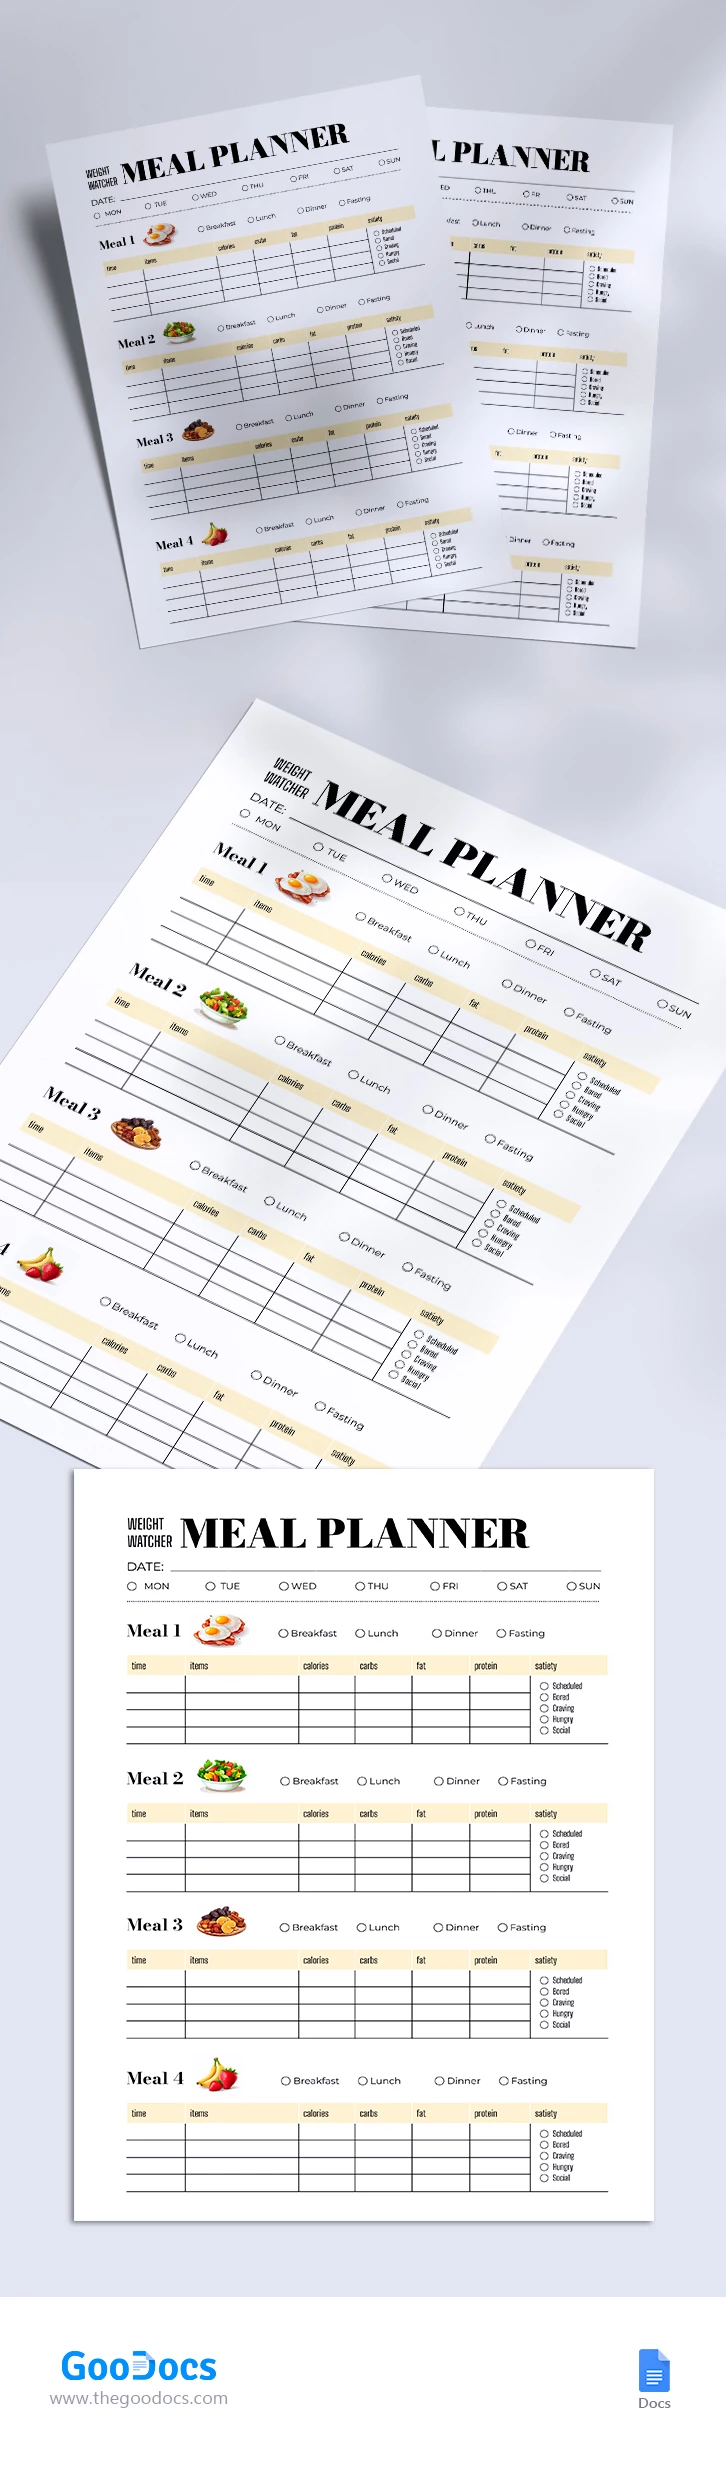 Weight Watchers Daily Meal Planner - free Google Docs Template - 10068220